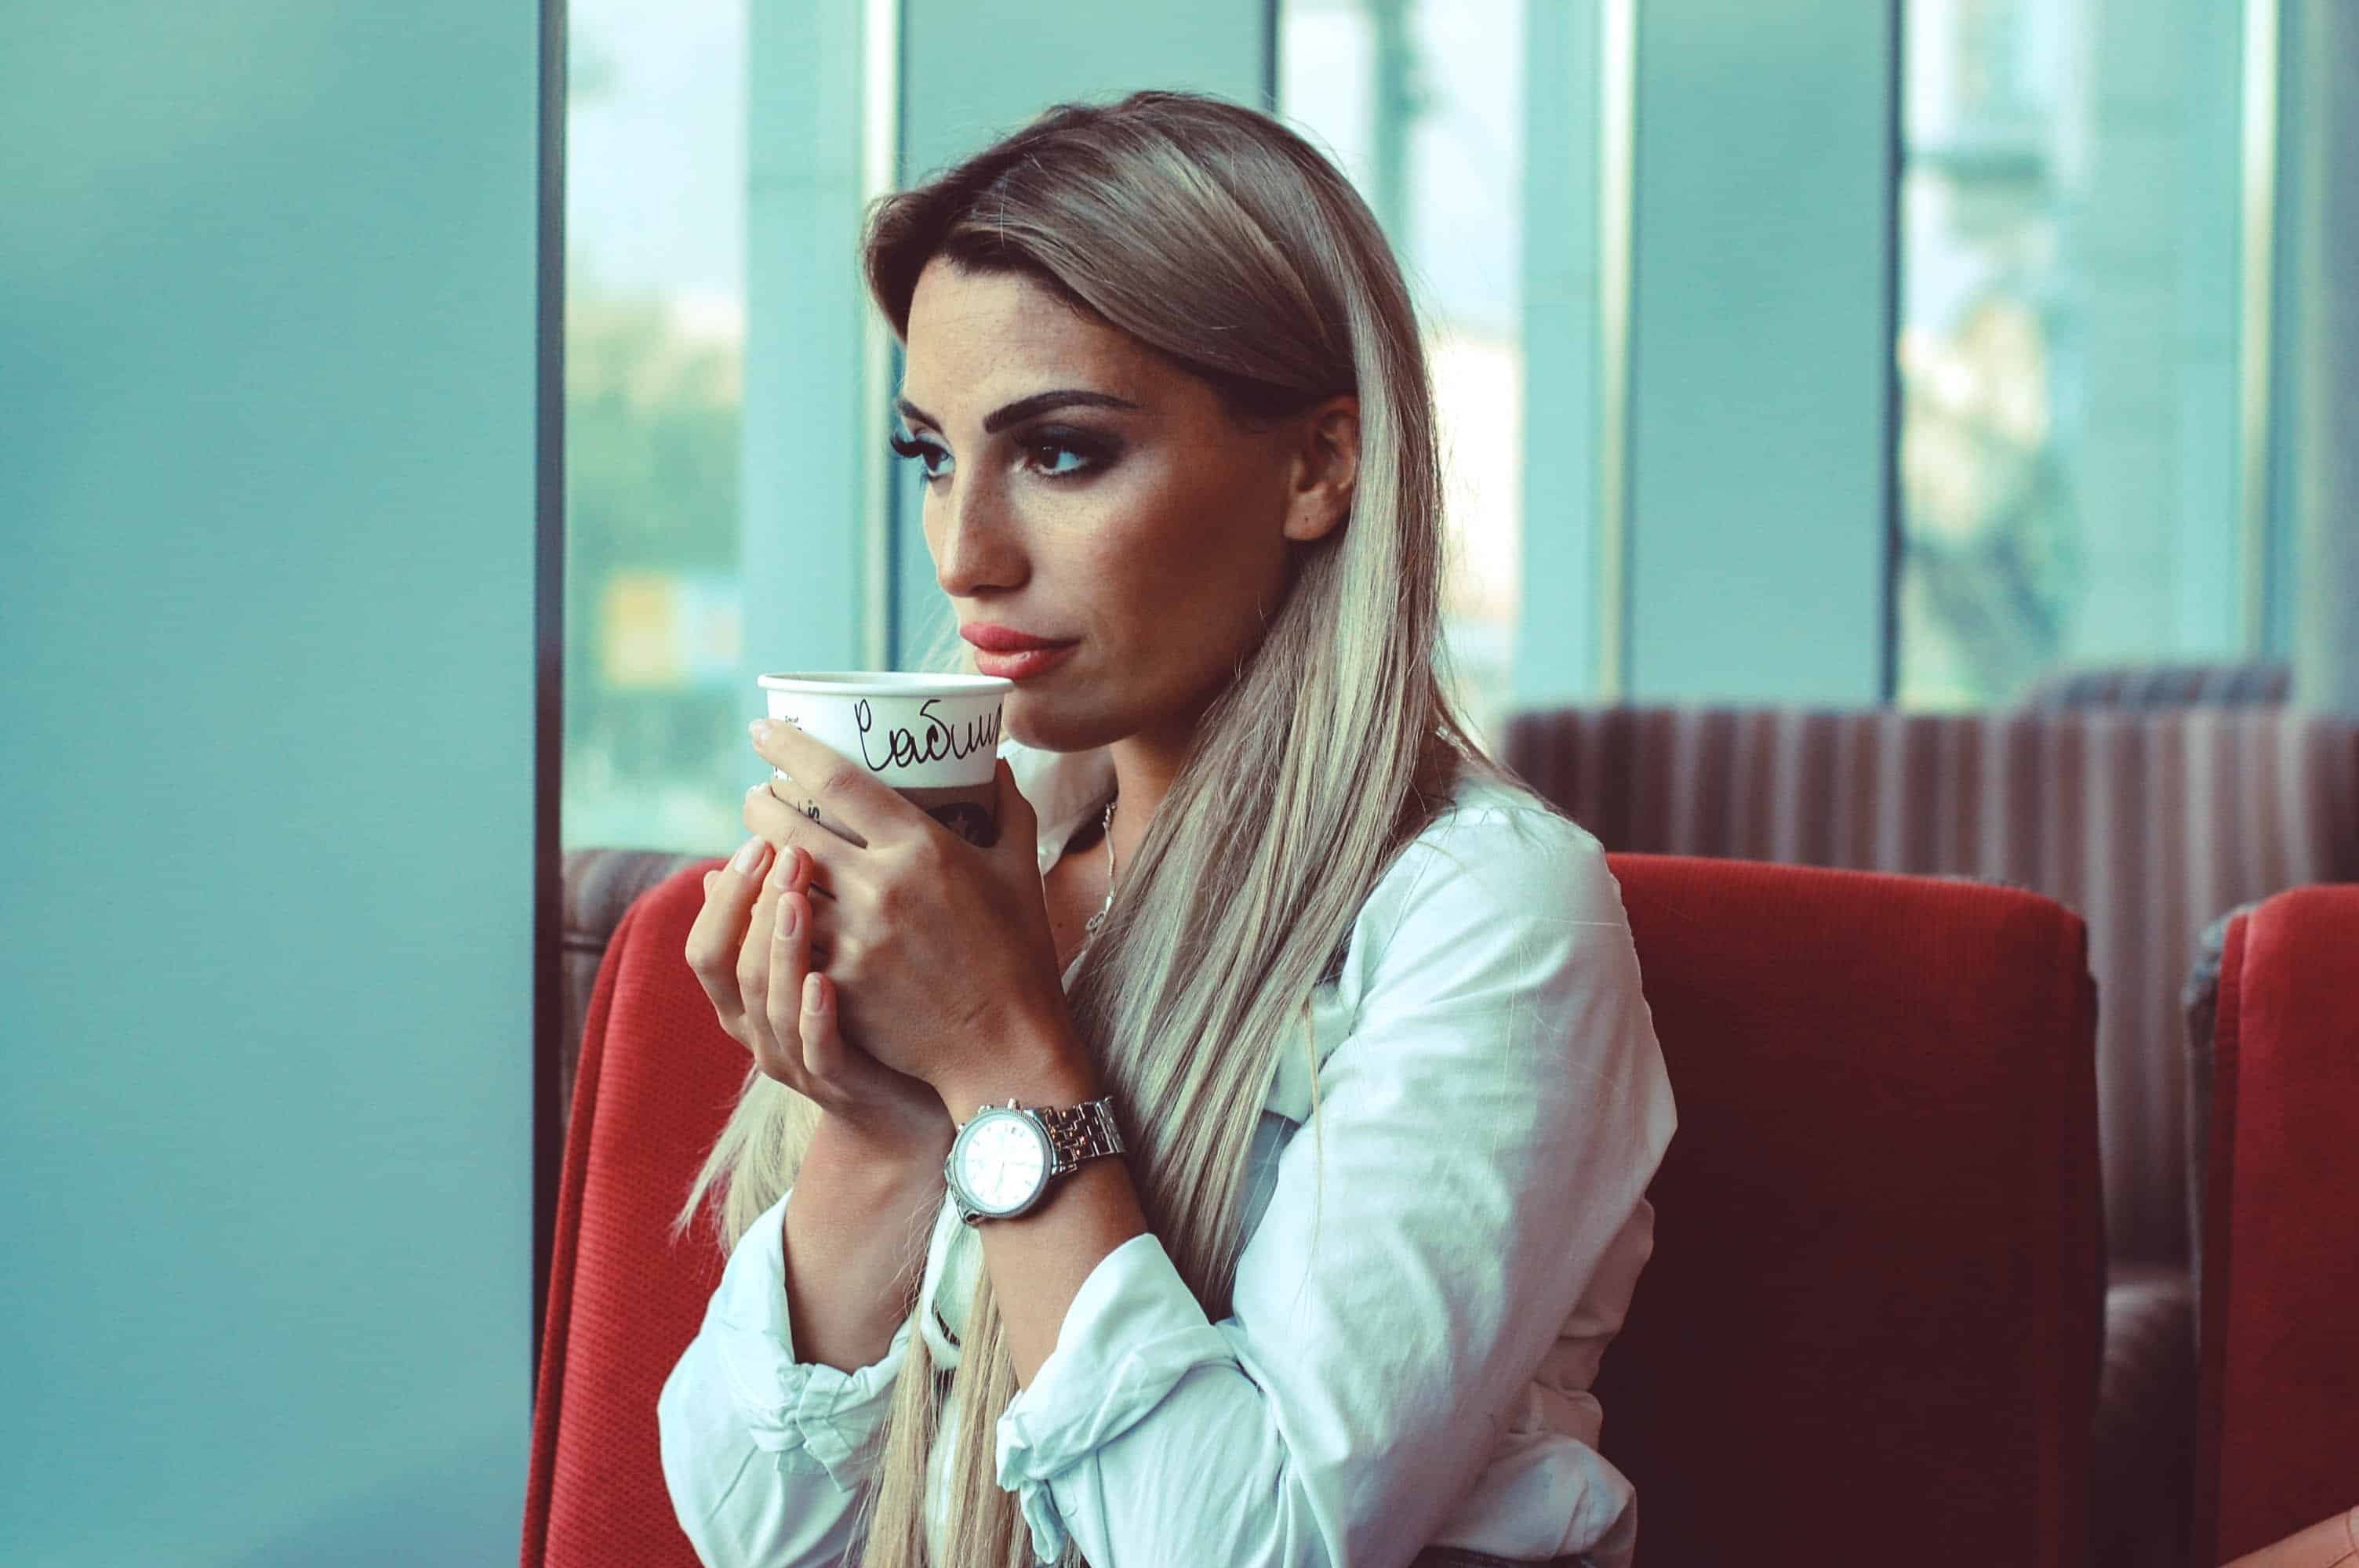 Researchers Reveal That Coffee Can Actually Help You Live Longer